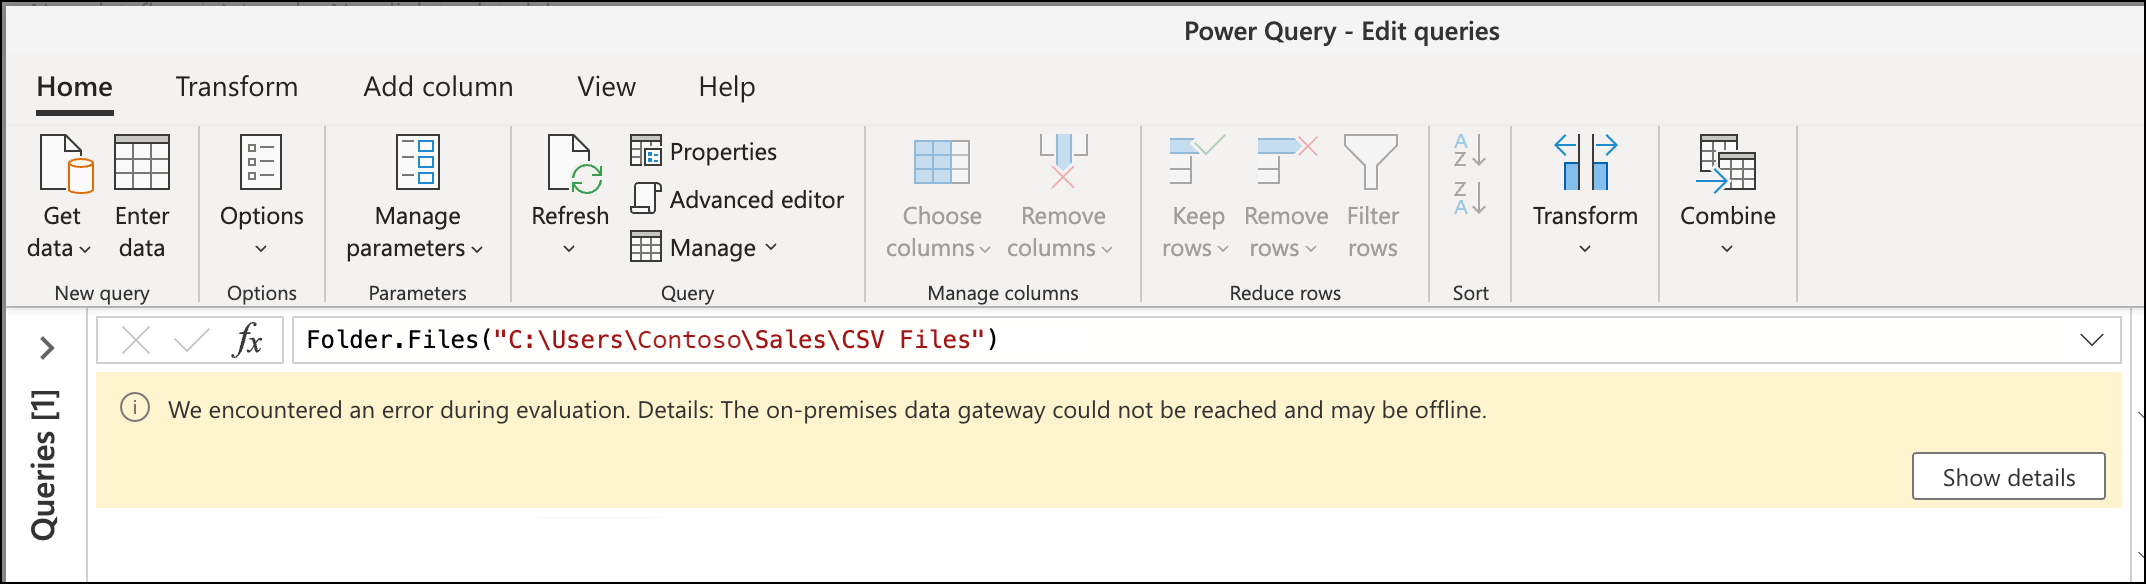 Image with a query that has an error message related to the data gateway being unreachable or offline.